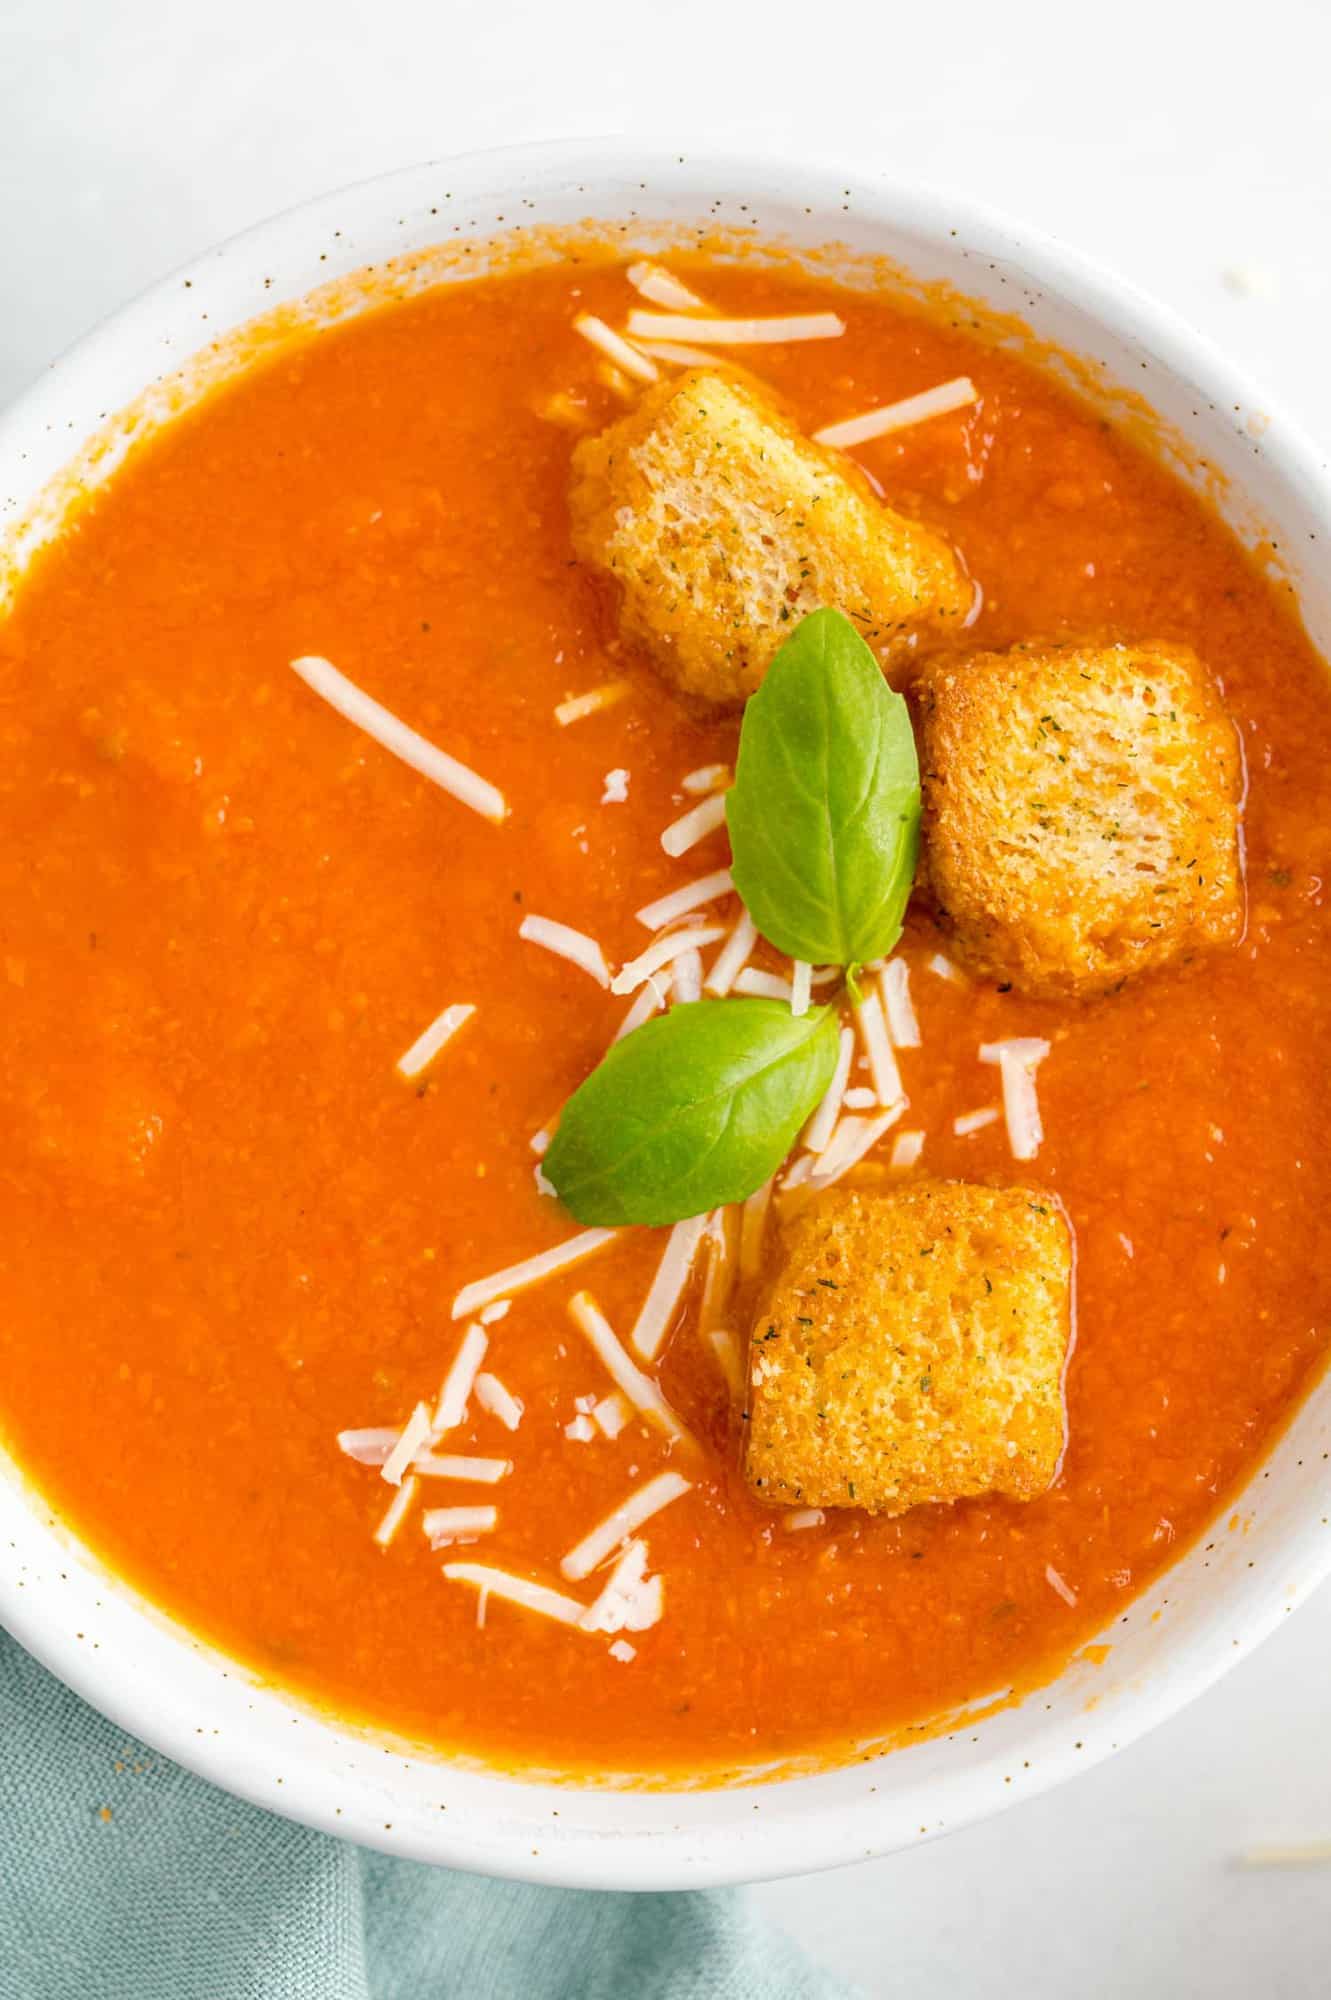 Tomato soup garnished with basil and croutons.